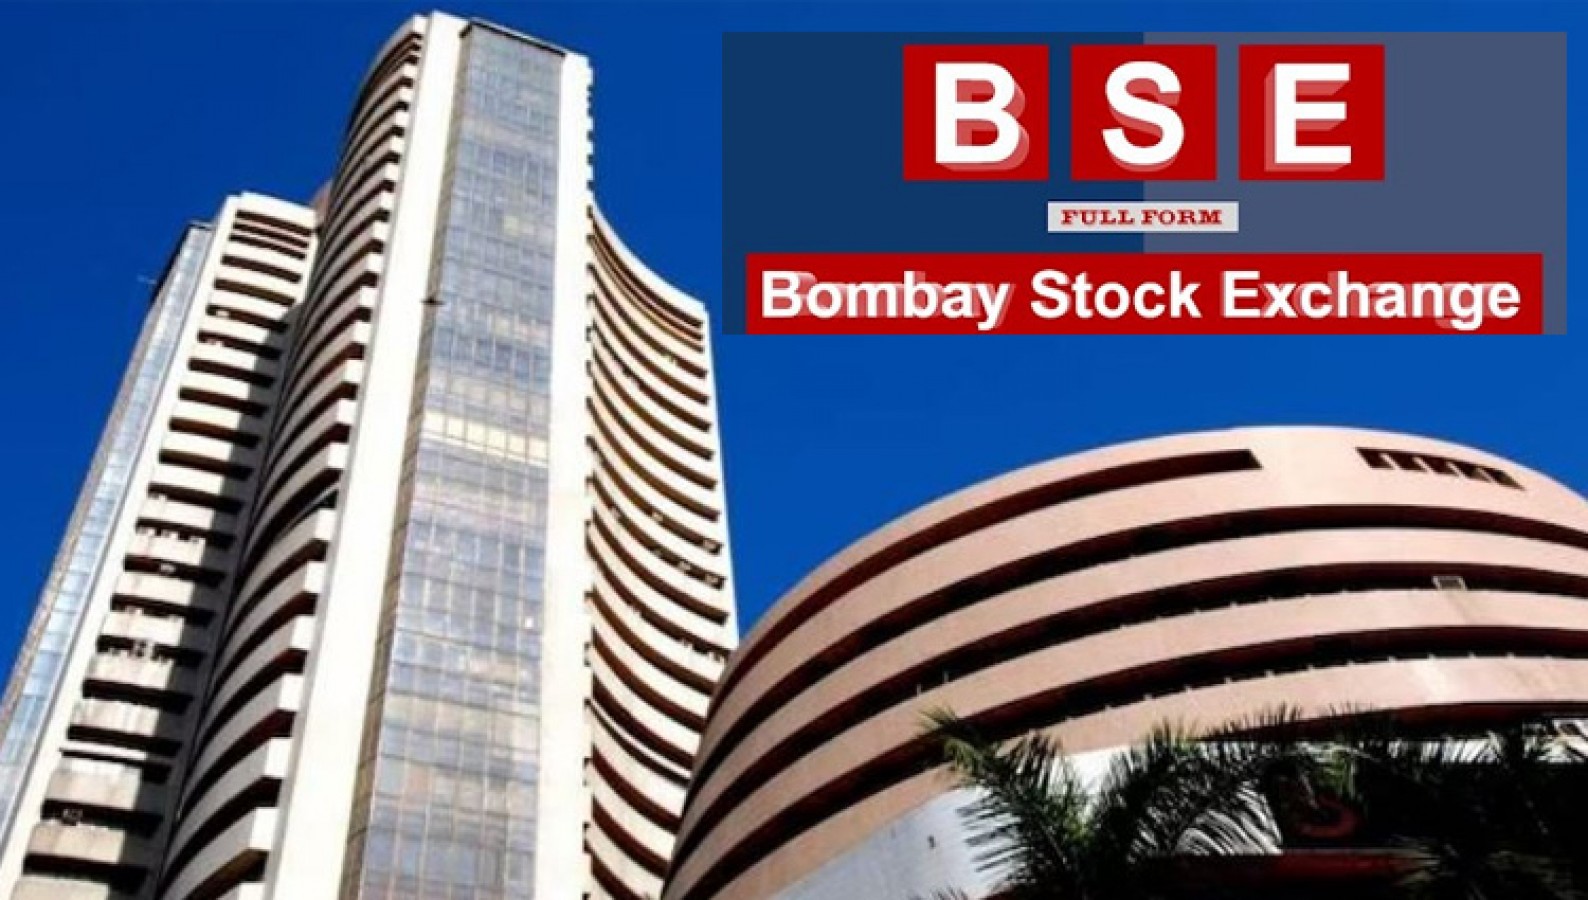 Bombay Stock Exchange Bse 64a93fd6cee2e